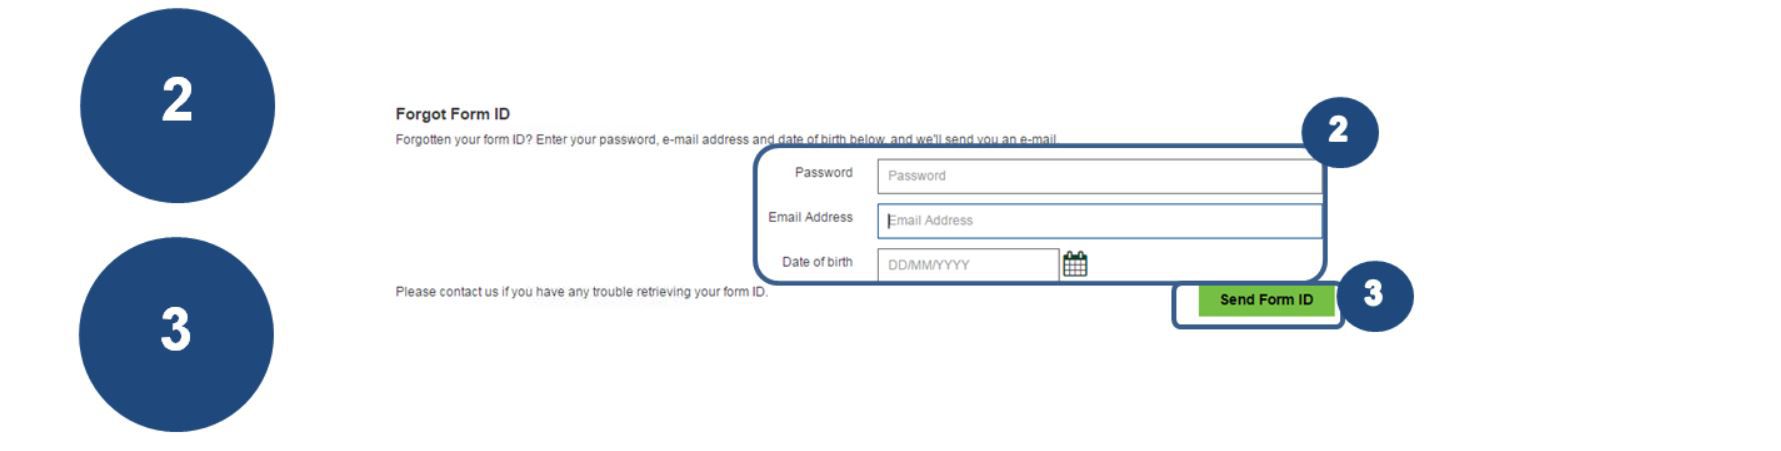 2. Enter your password, email address and date of birth.